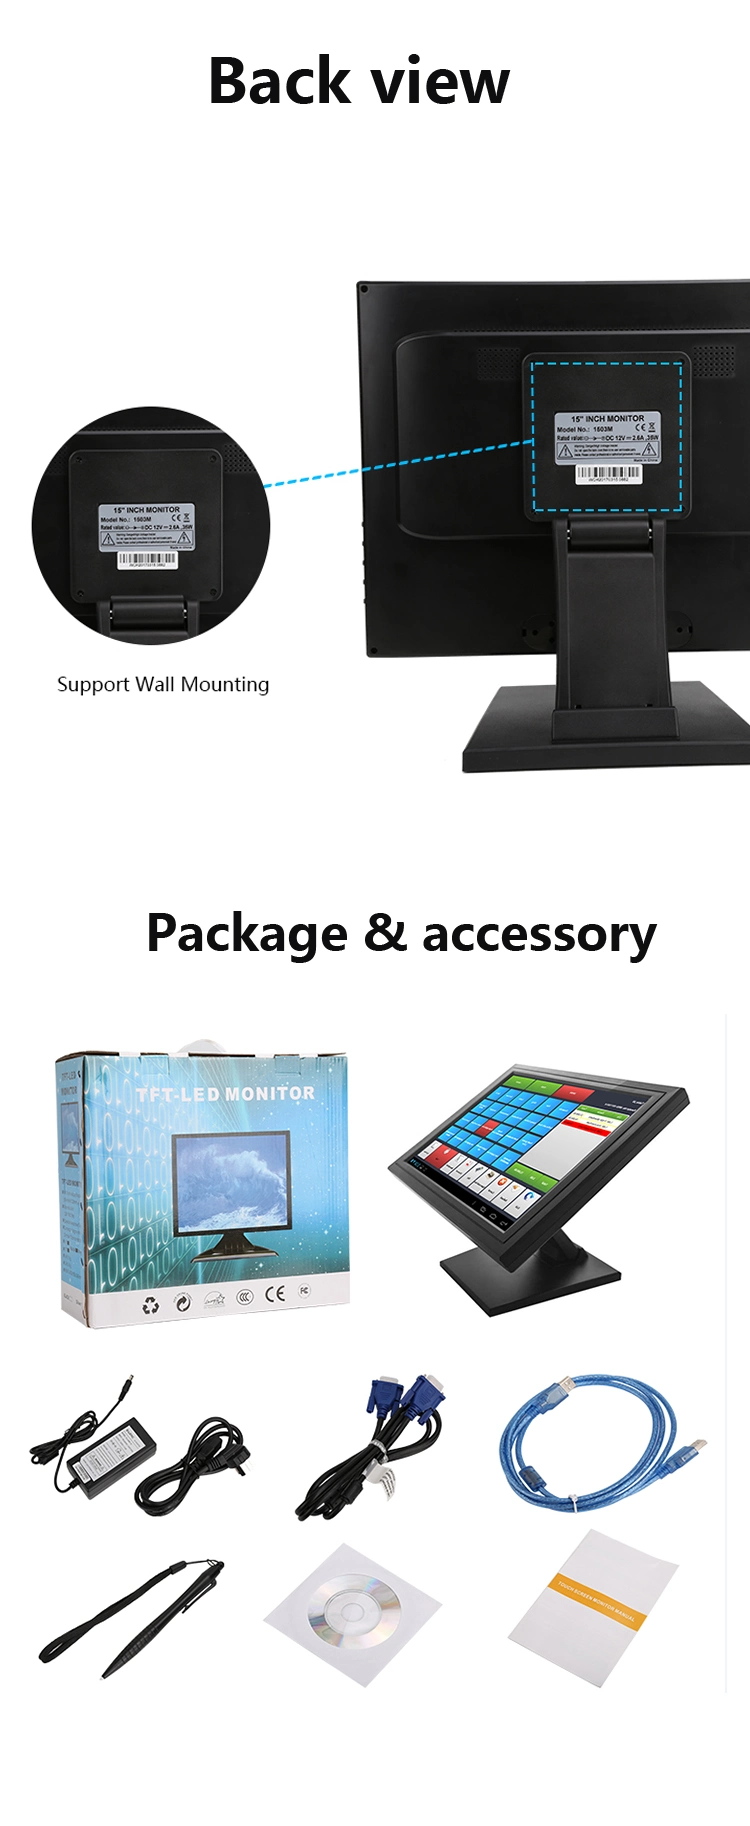 Low Cost Cheap Bluetooth Wall Mount POS Touch Screen Monitor 17